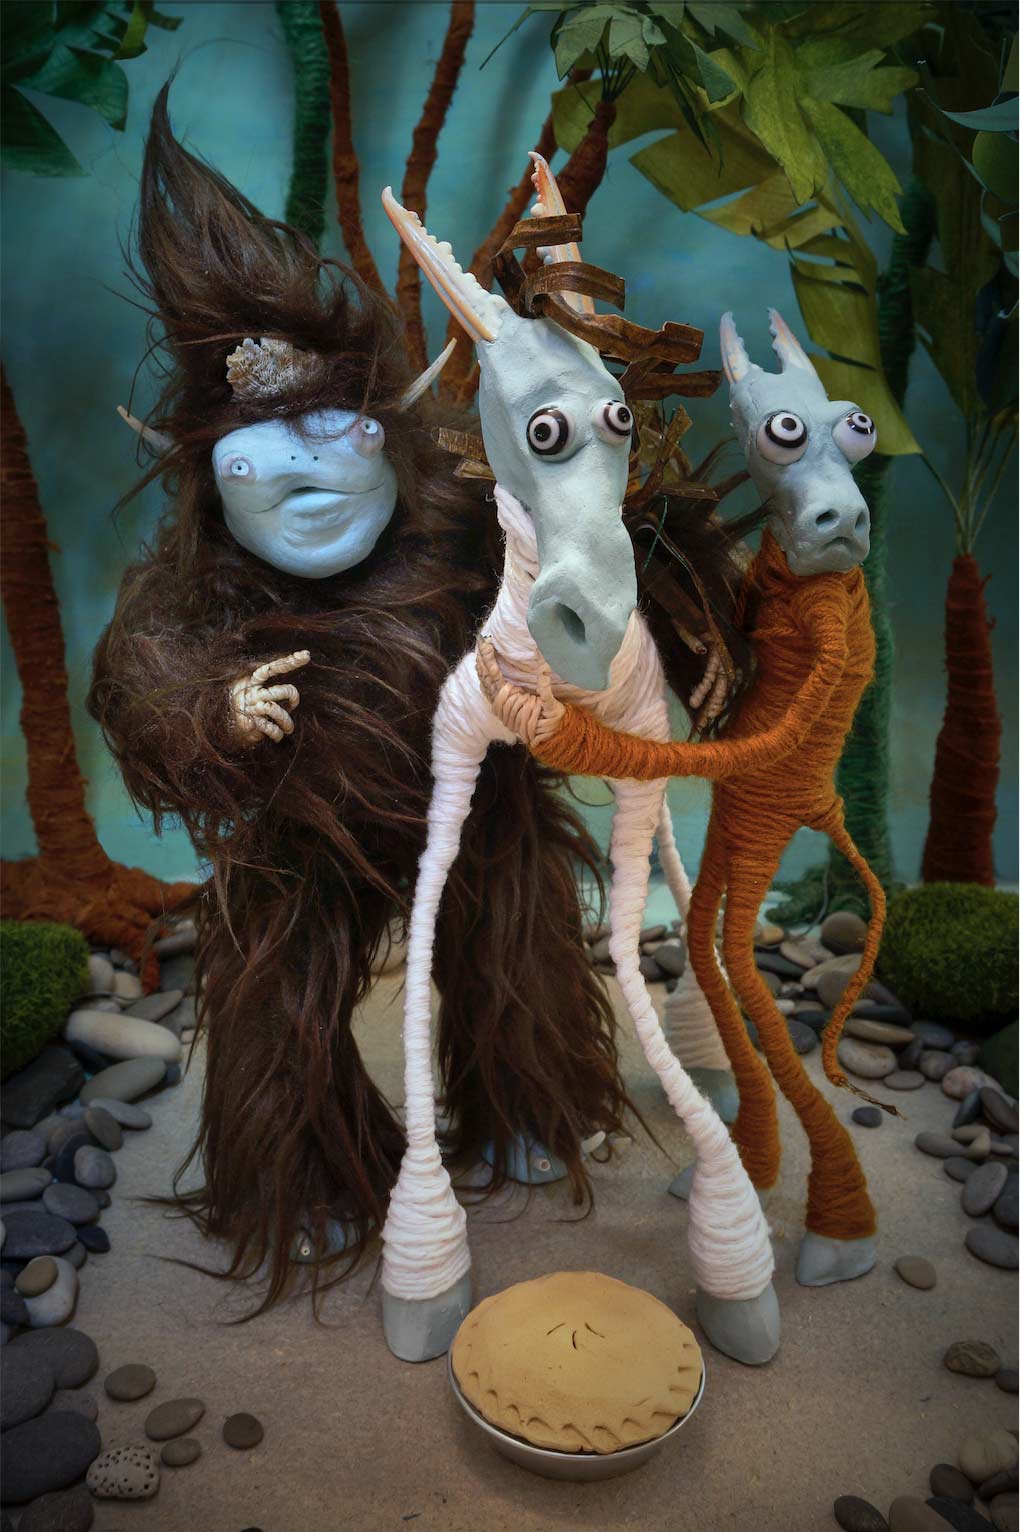 3 stop motion characters, a furry monster with horns, a bipedal cow and a horse offer a pie to the forest spirit.